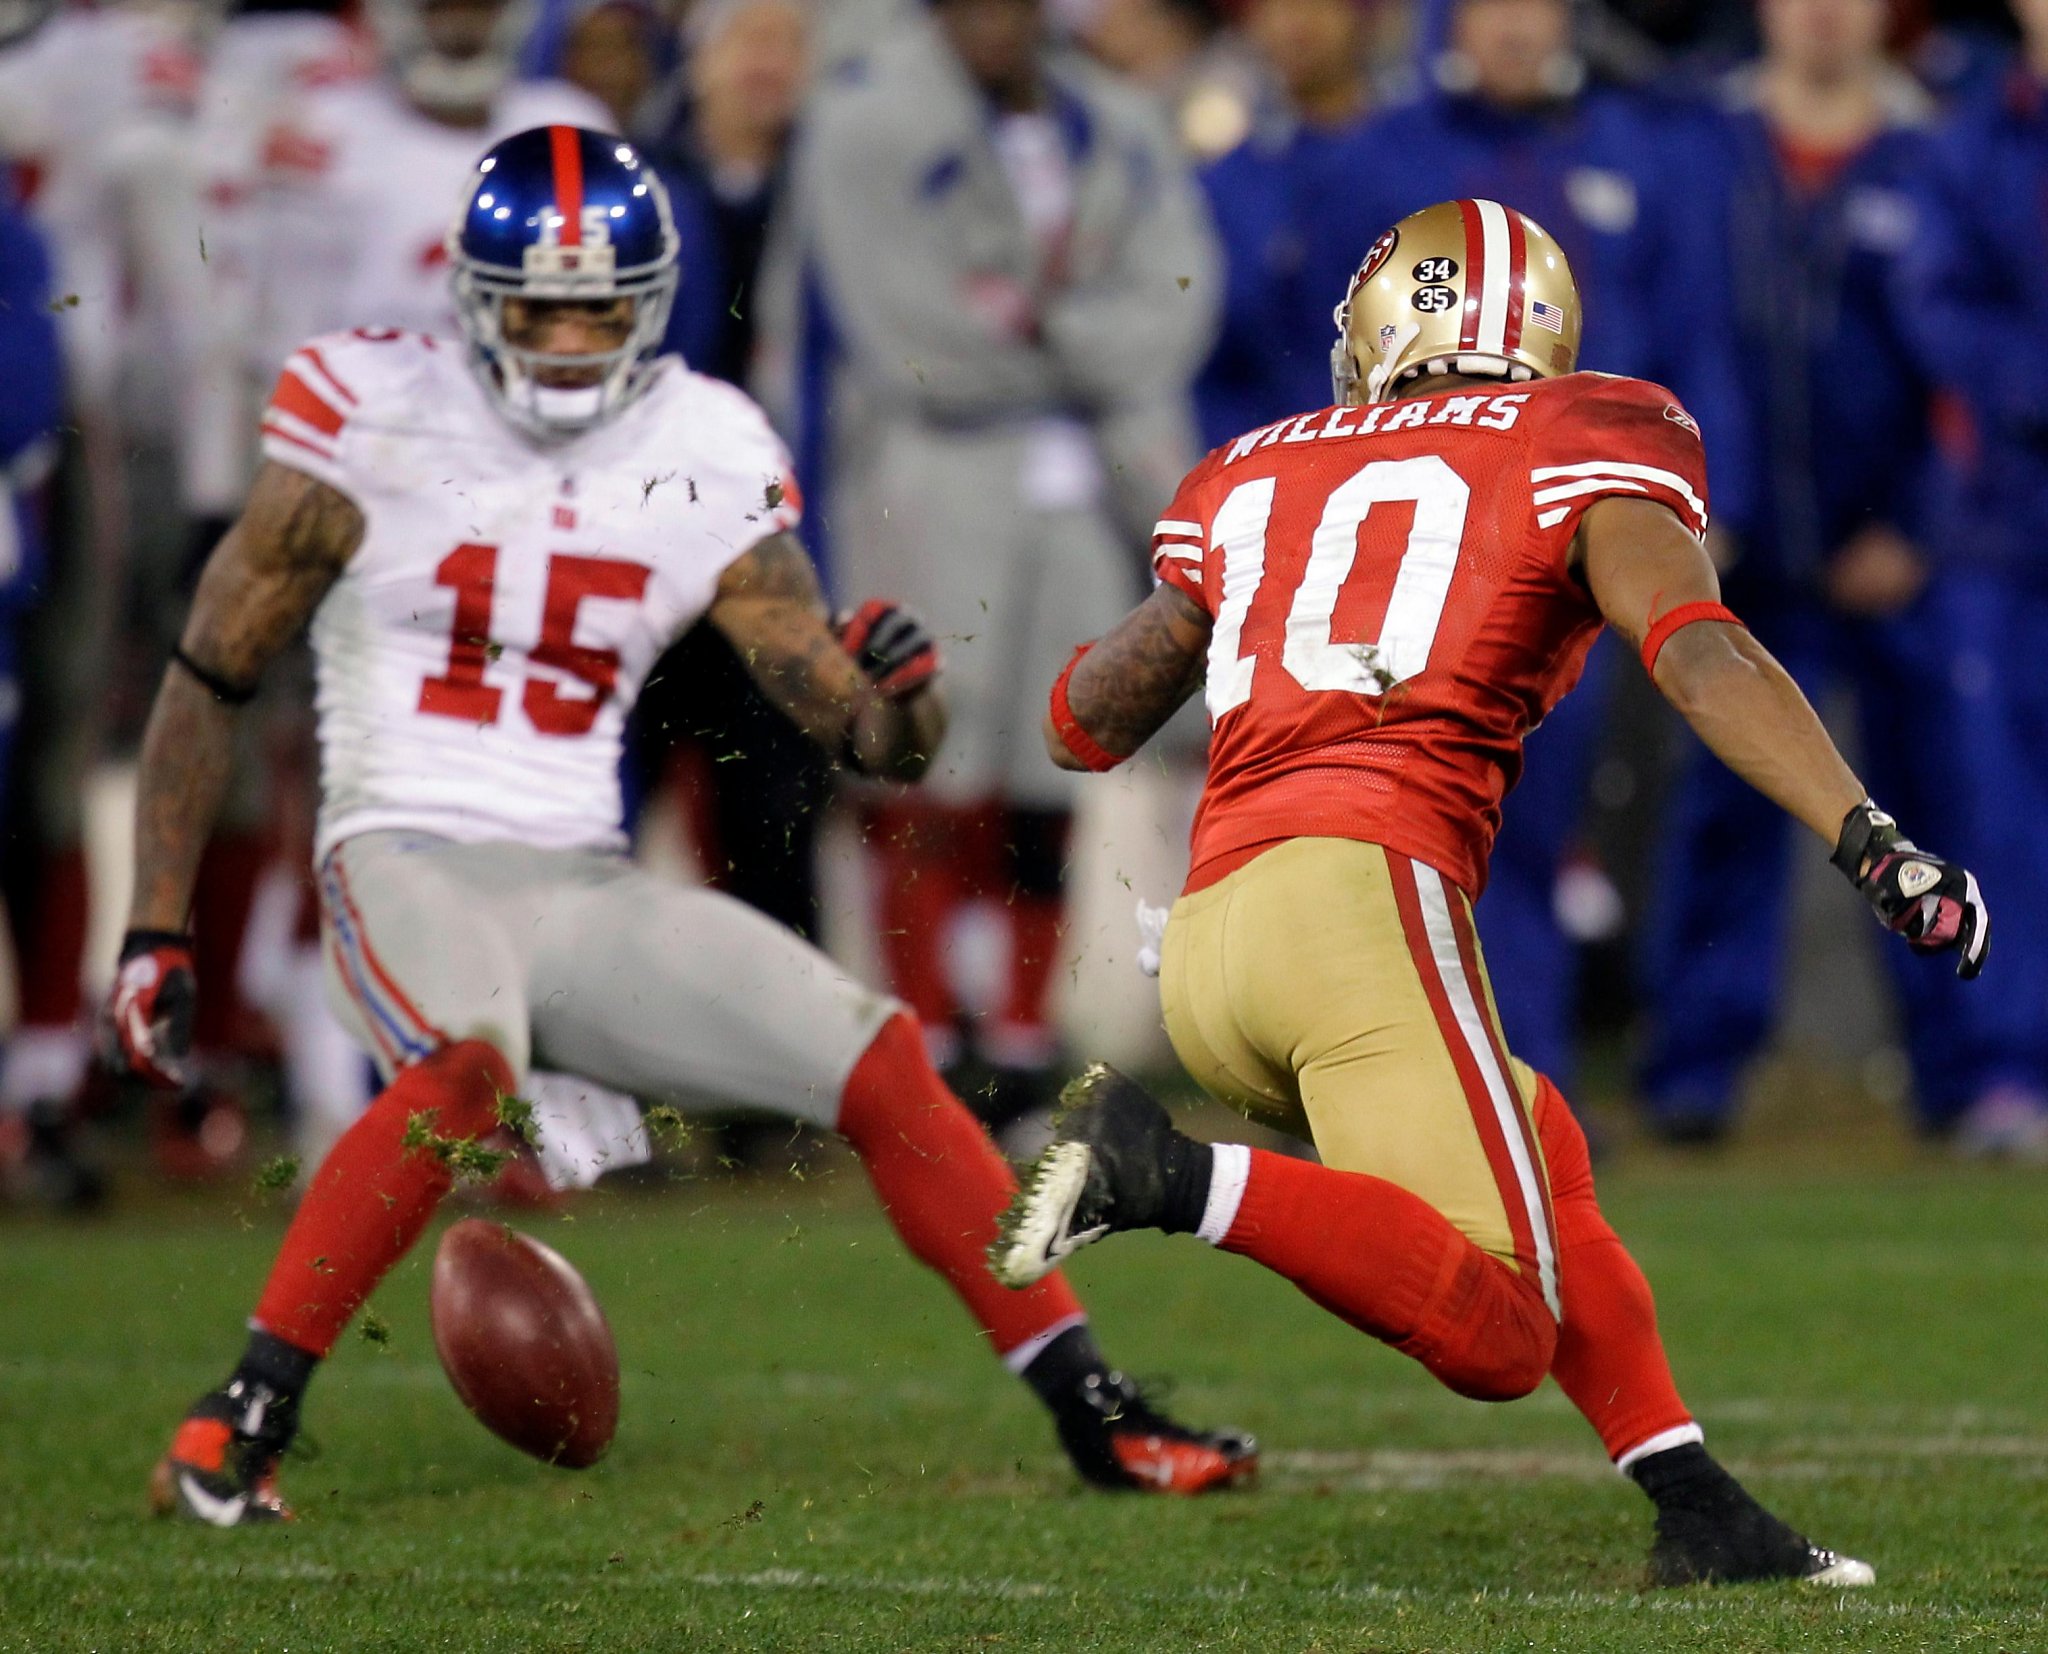 What if 49ers didn't lose the 2012 NFC championship?